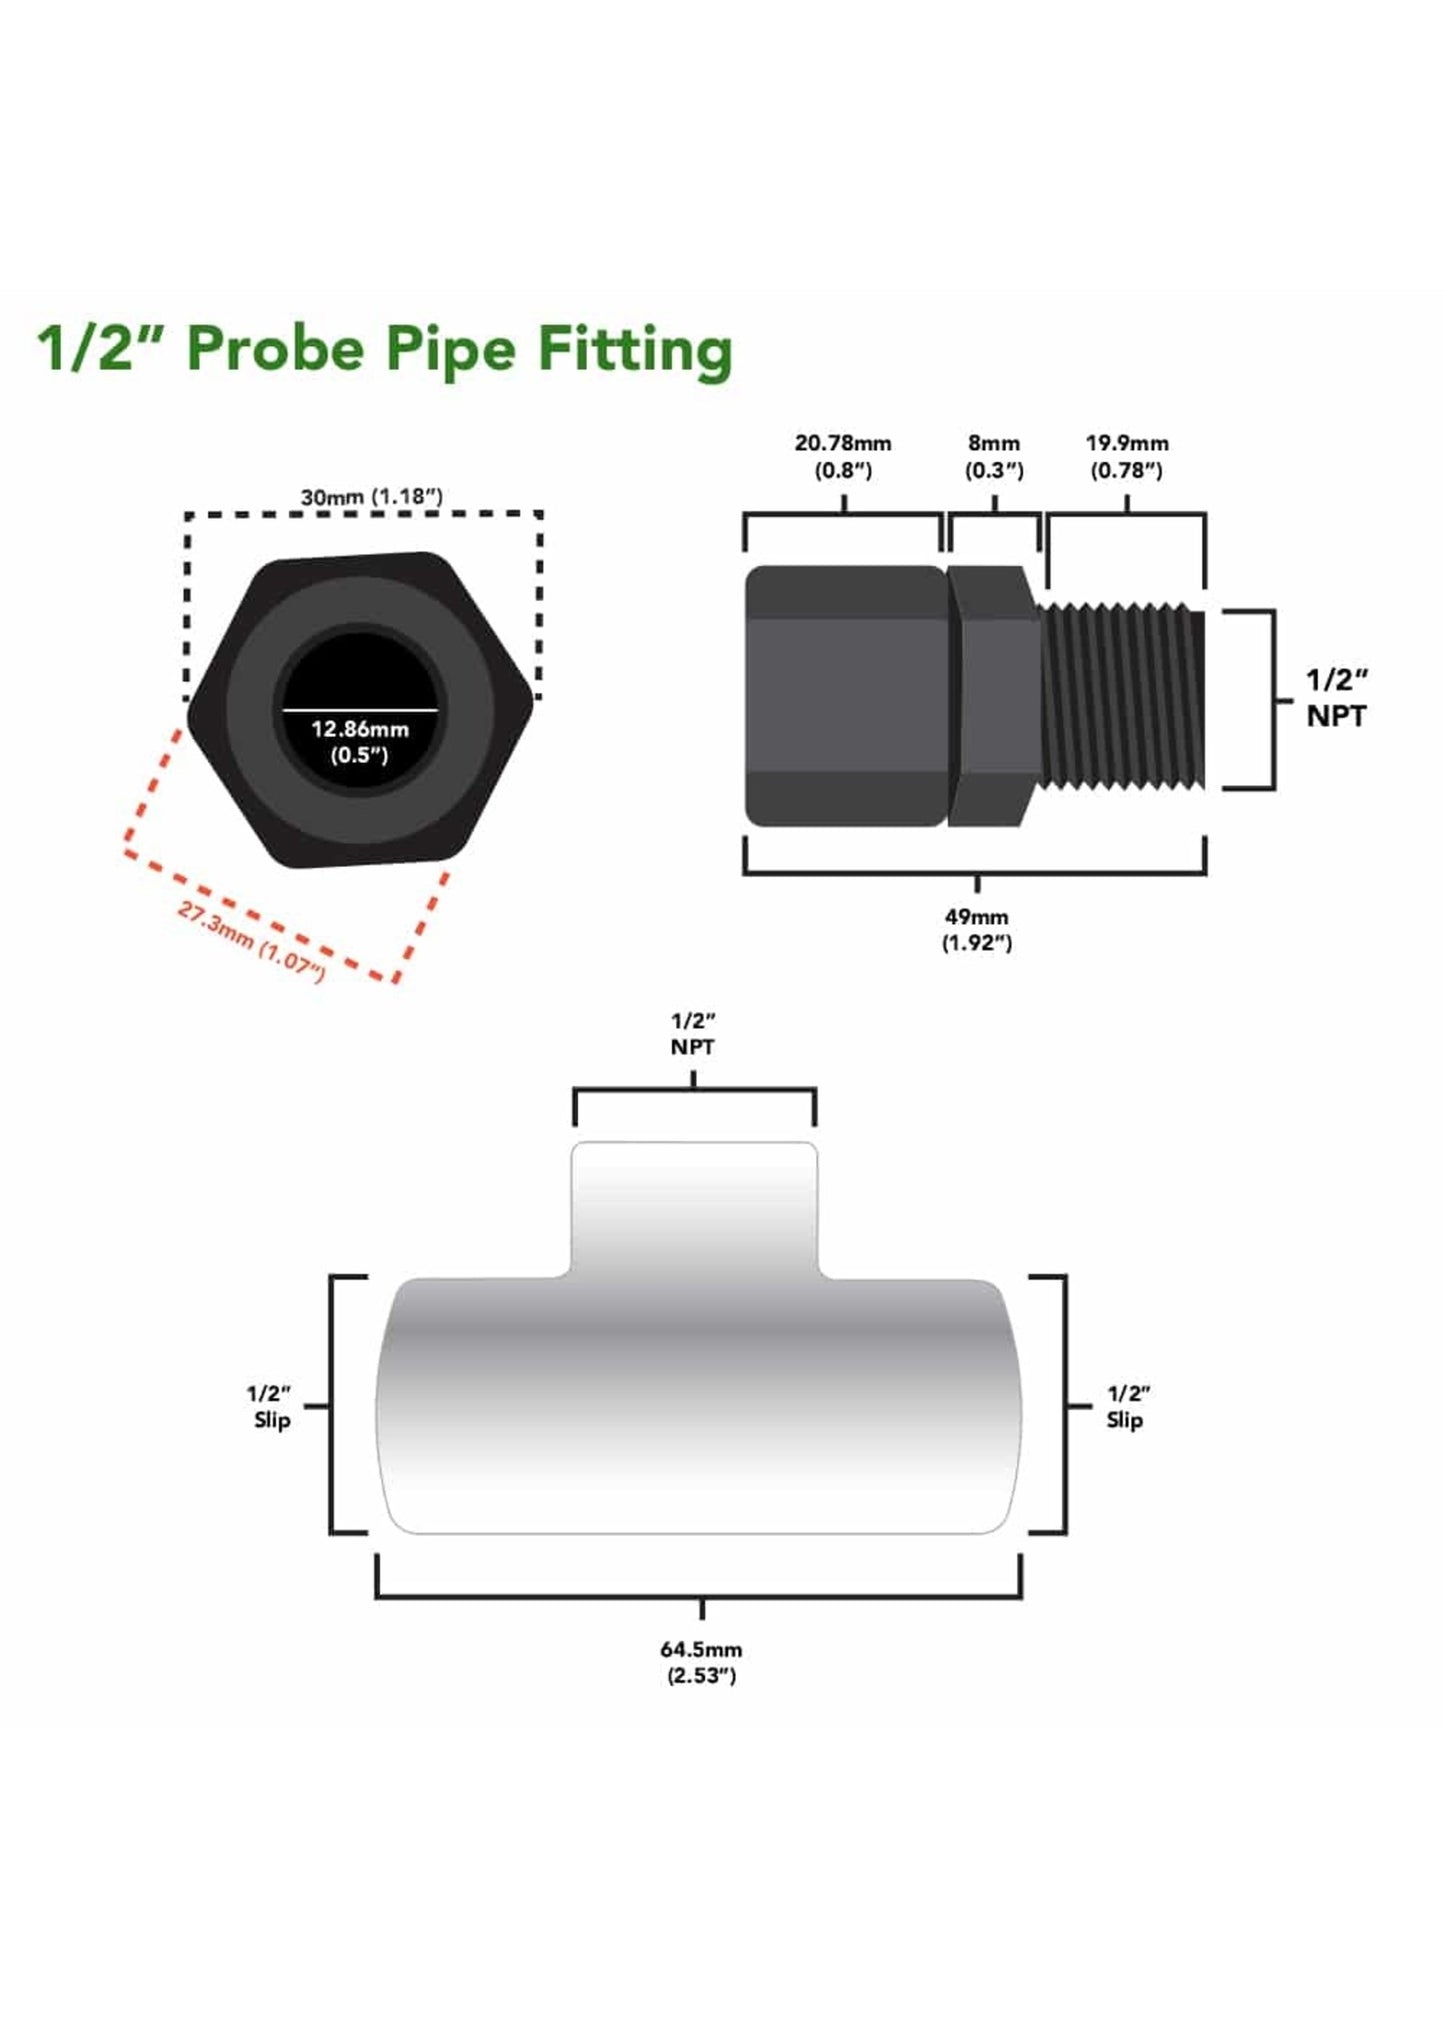 Probe Pipe Fitting